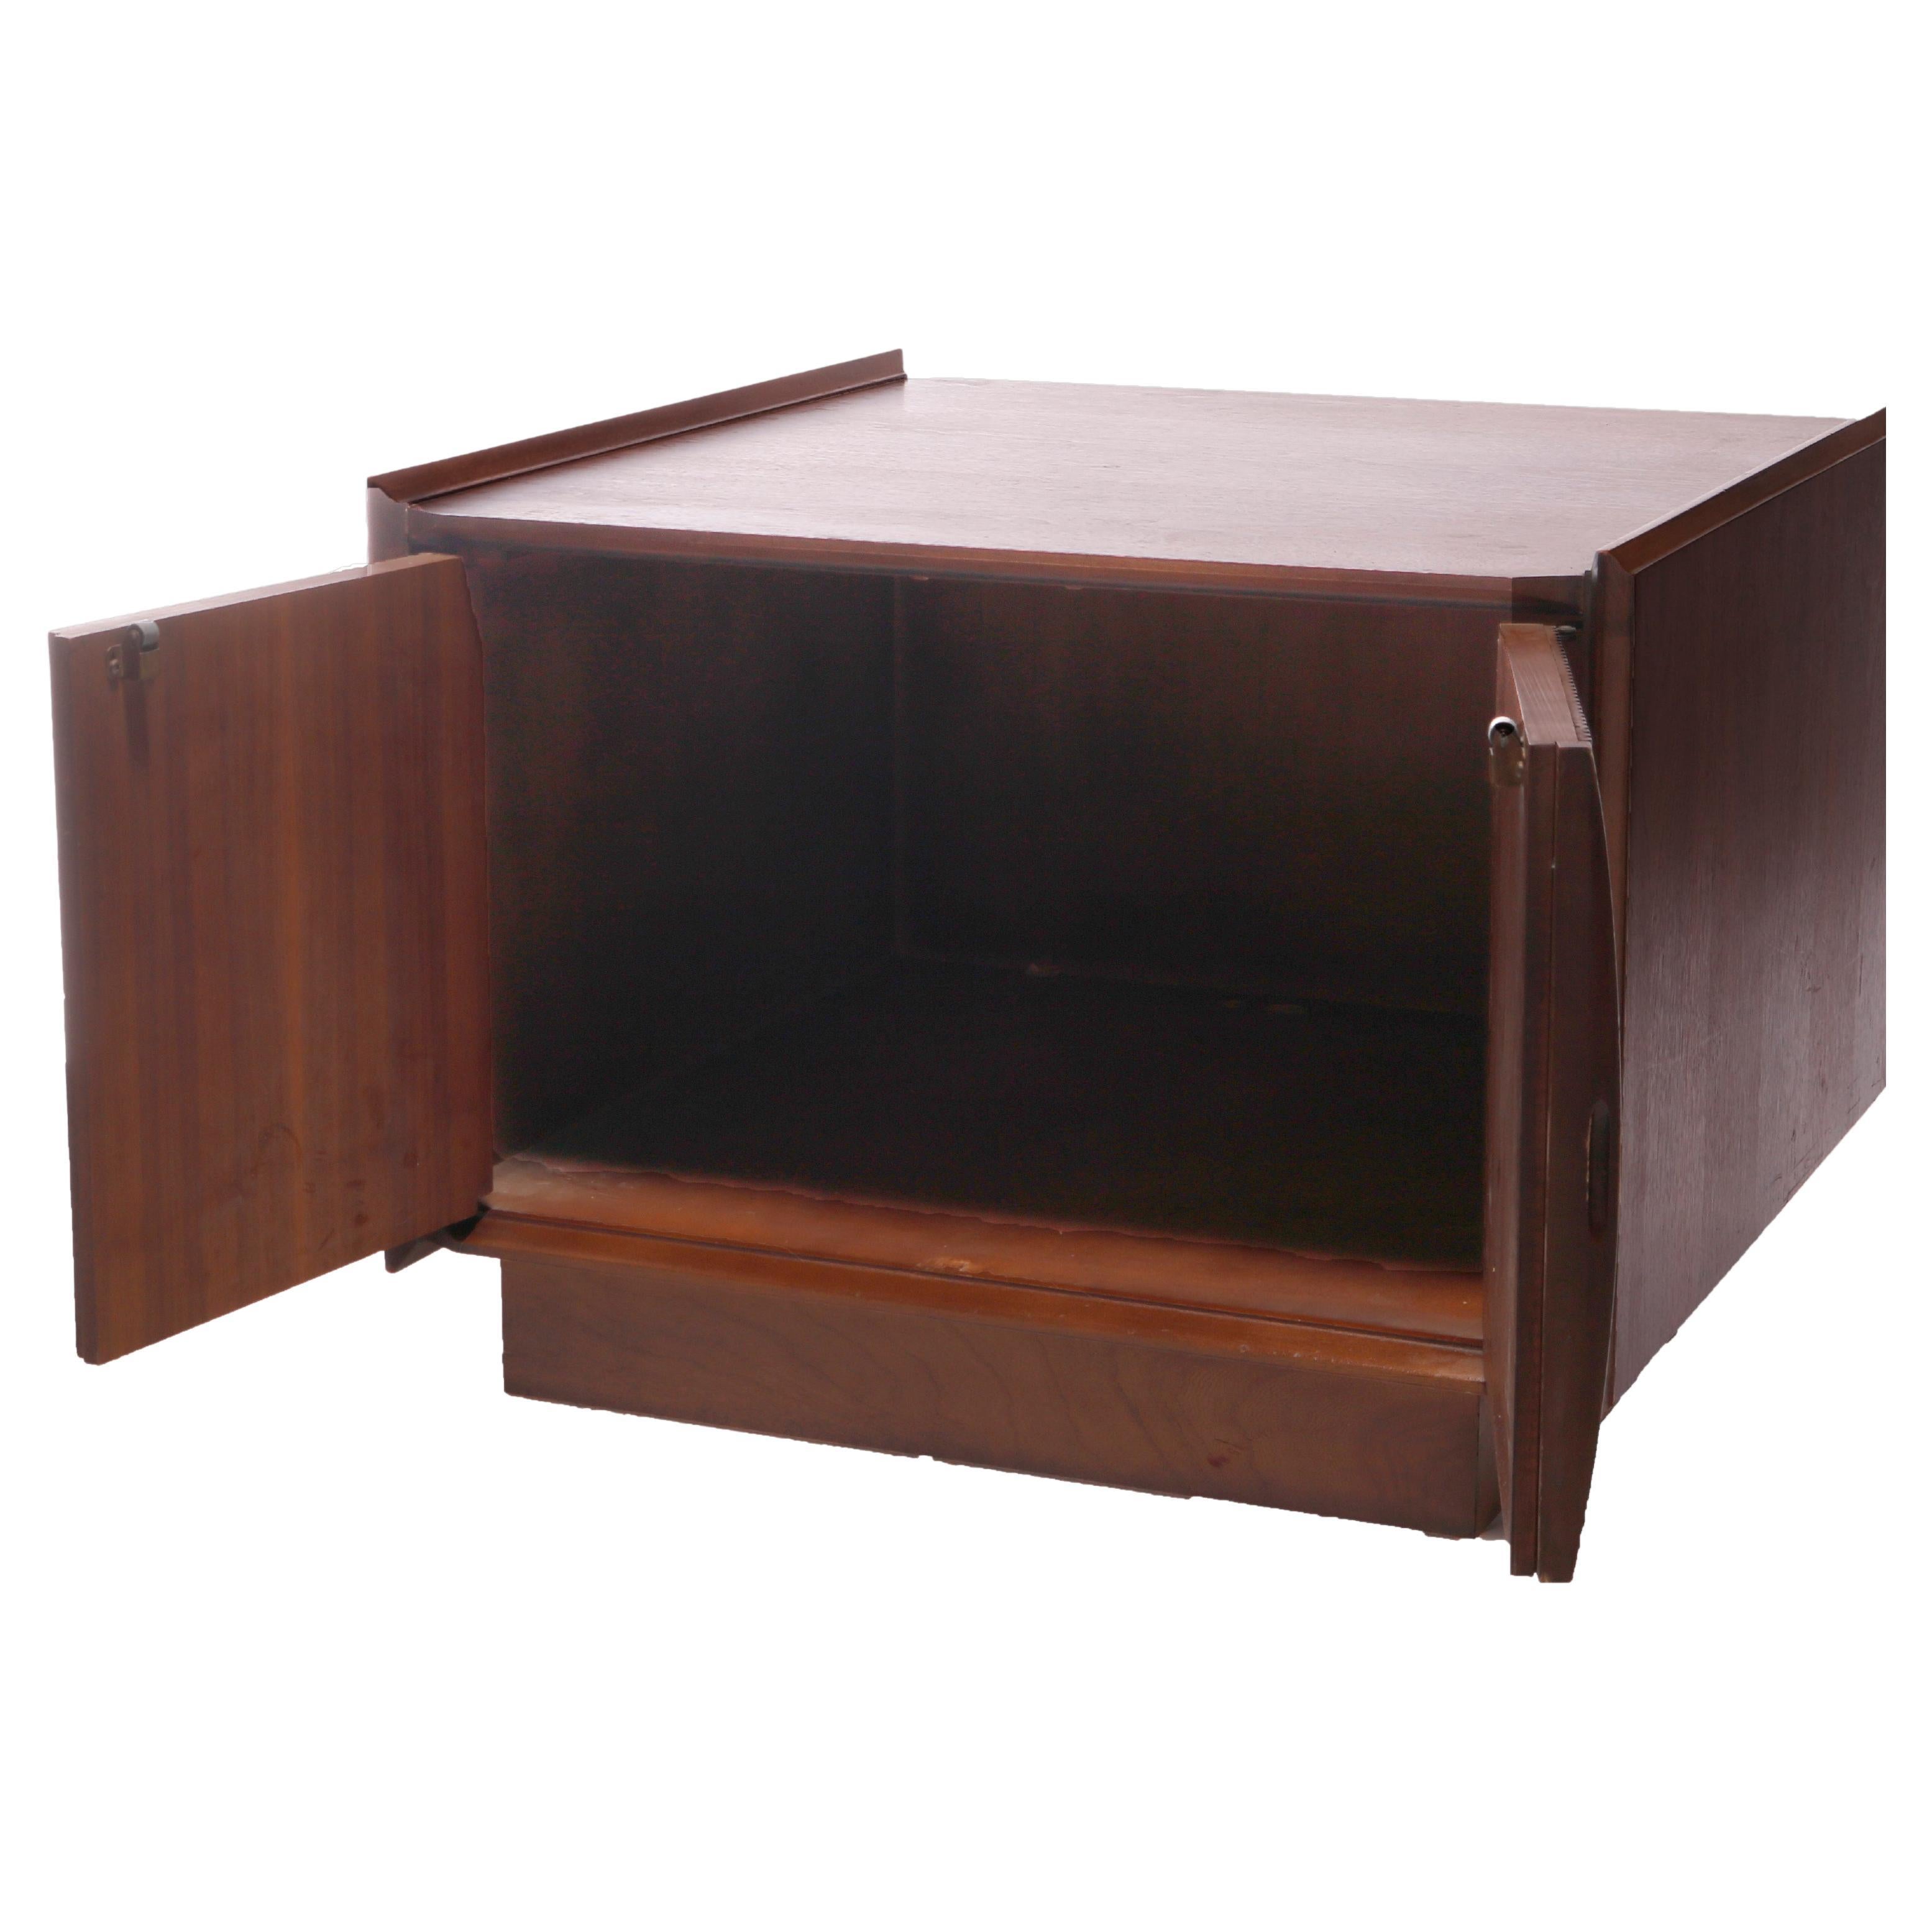 A Mid Century Danish Modern end stand offers walnut construction in cube form with double tambour style doors opening to interior storage compartment, c1960

Measures- 21''H x 28.25''W x 28''D